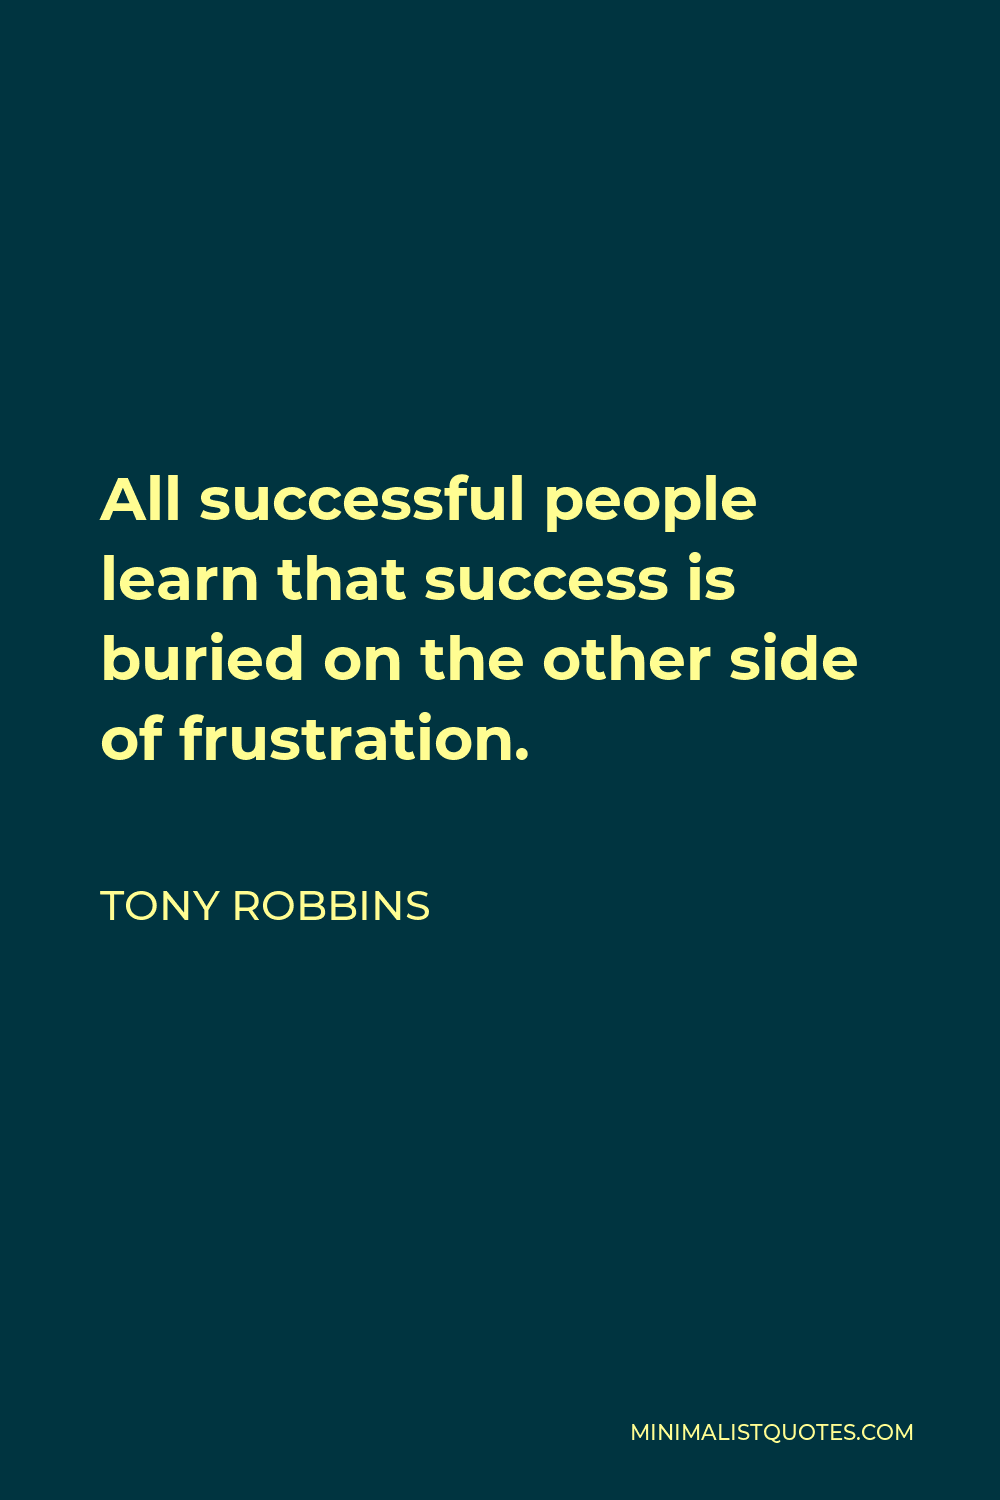 Tony Robbins Quote - All successful people learn that success is buried on the other side of frustration.